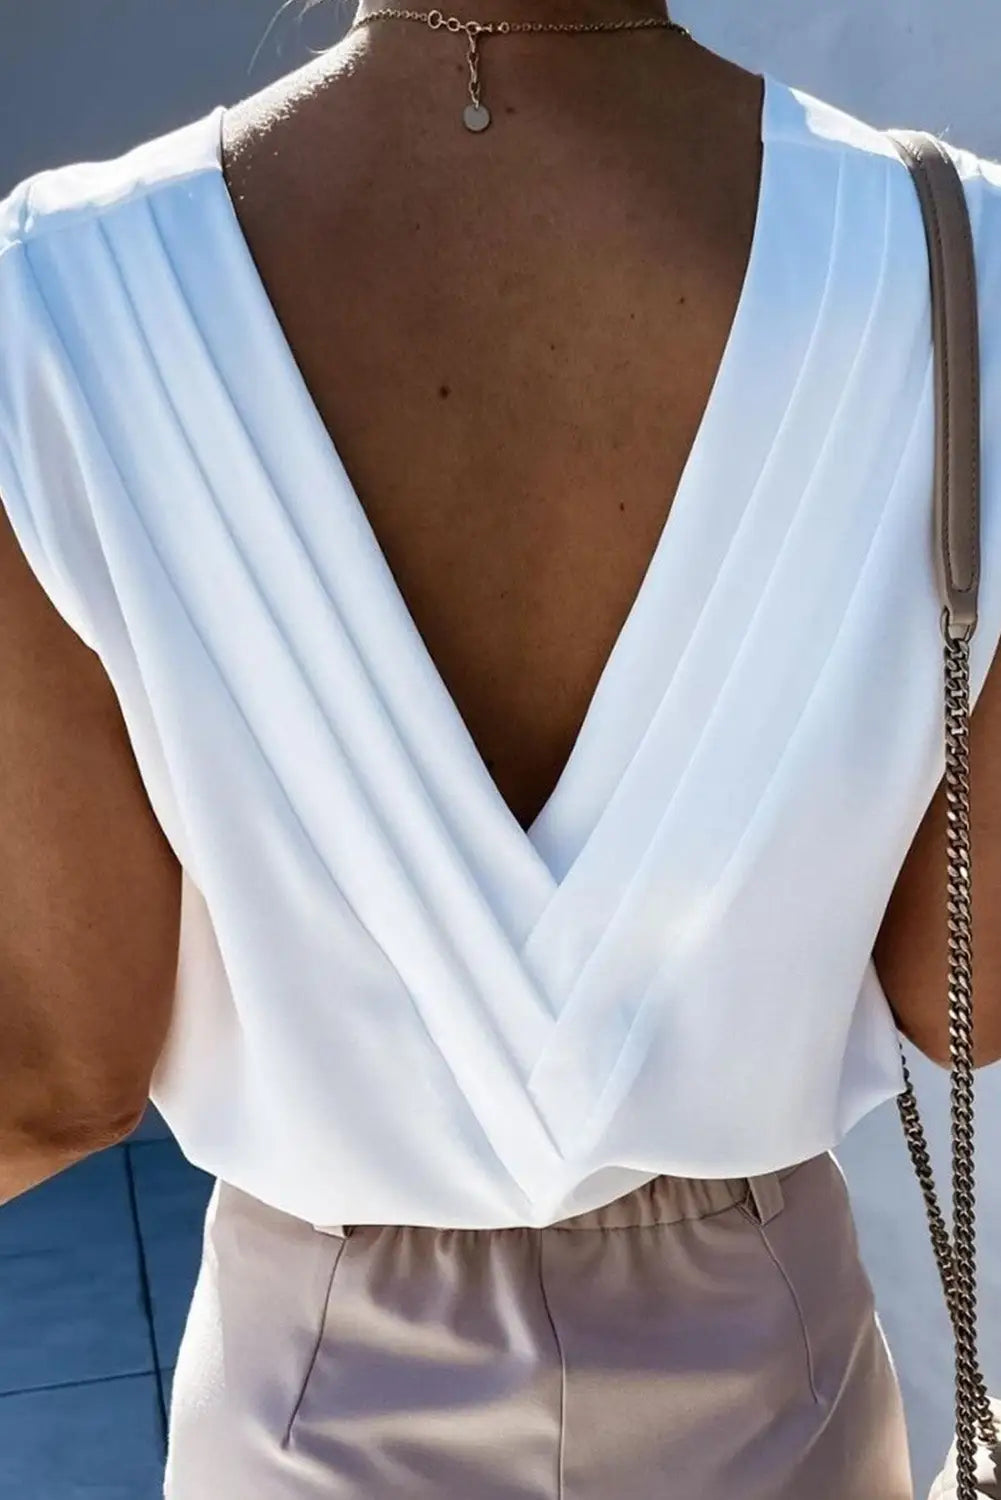 White v neck pleated backless cap sleeve top - tank tops